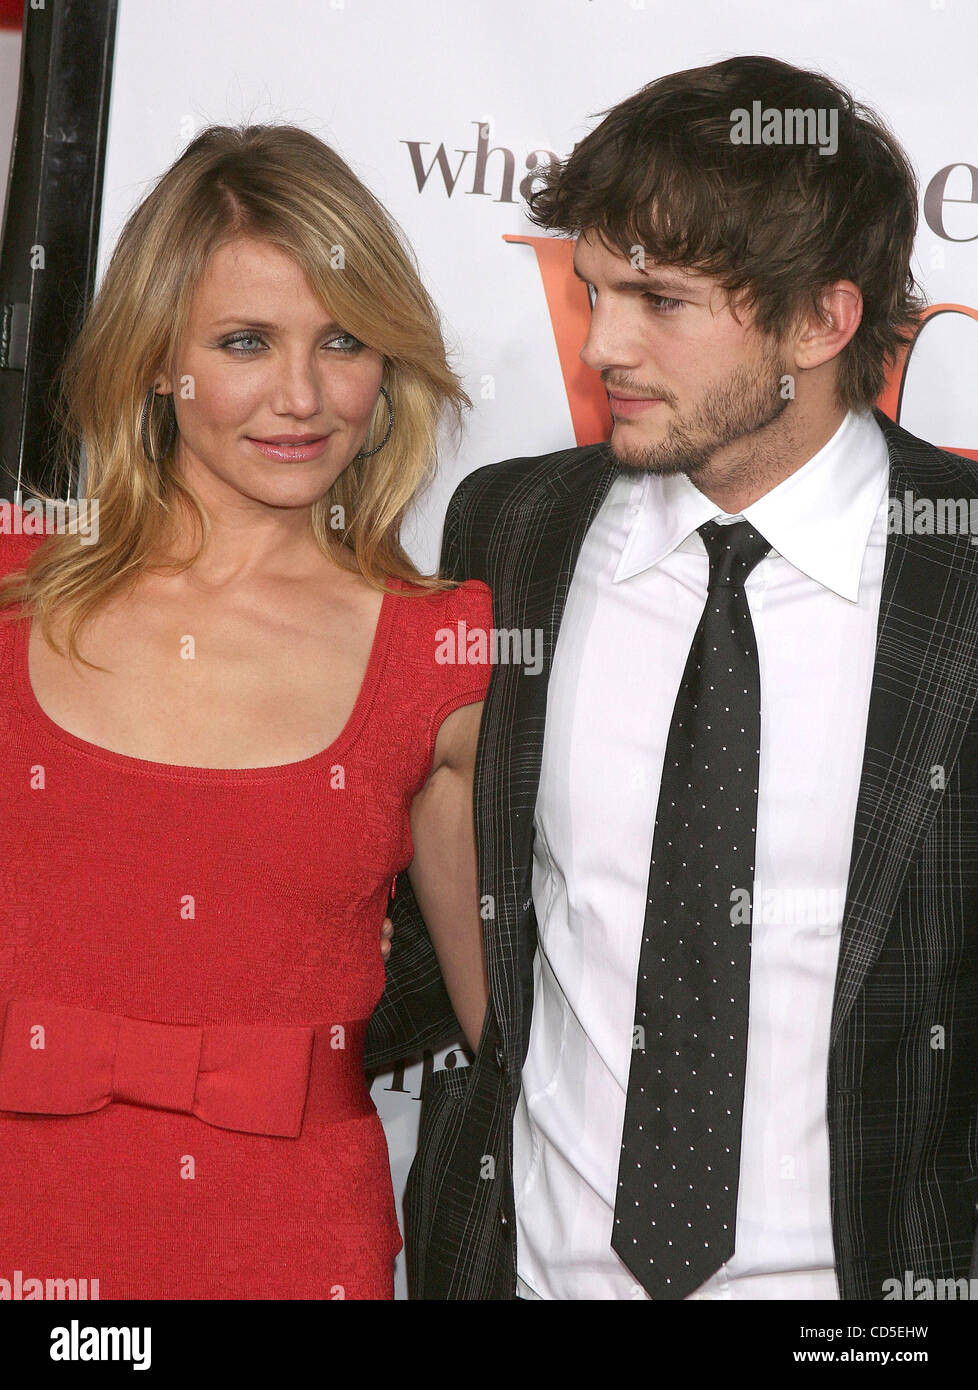 Actress Cameron Diaz and Actor Ashton Kutcher  at the 'What Happens in Vegas' Premiere held at the Mann Village Theater. Los Angeles. Stock Photo